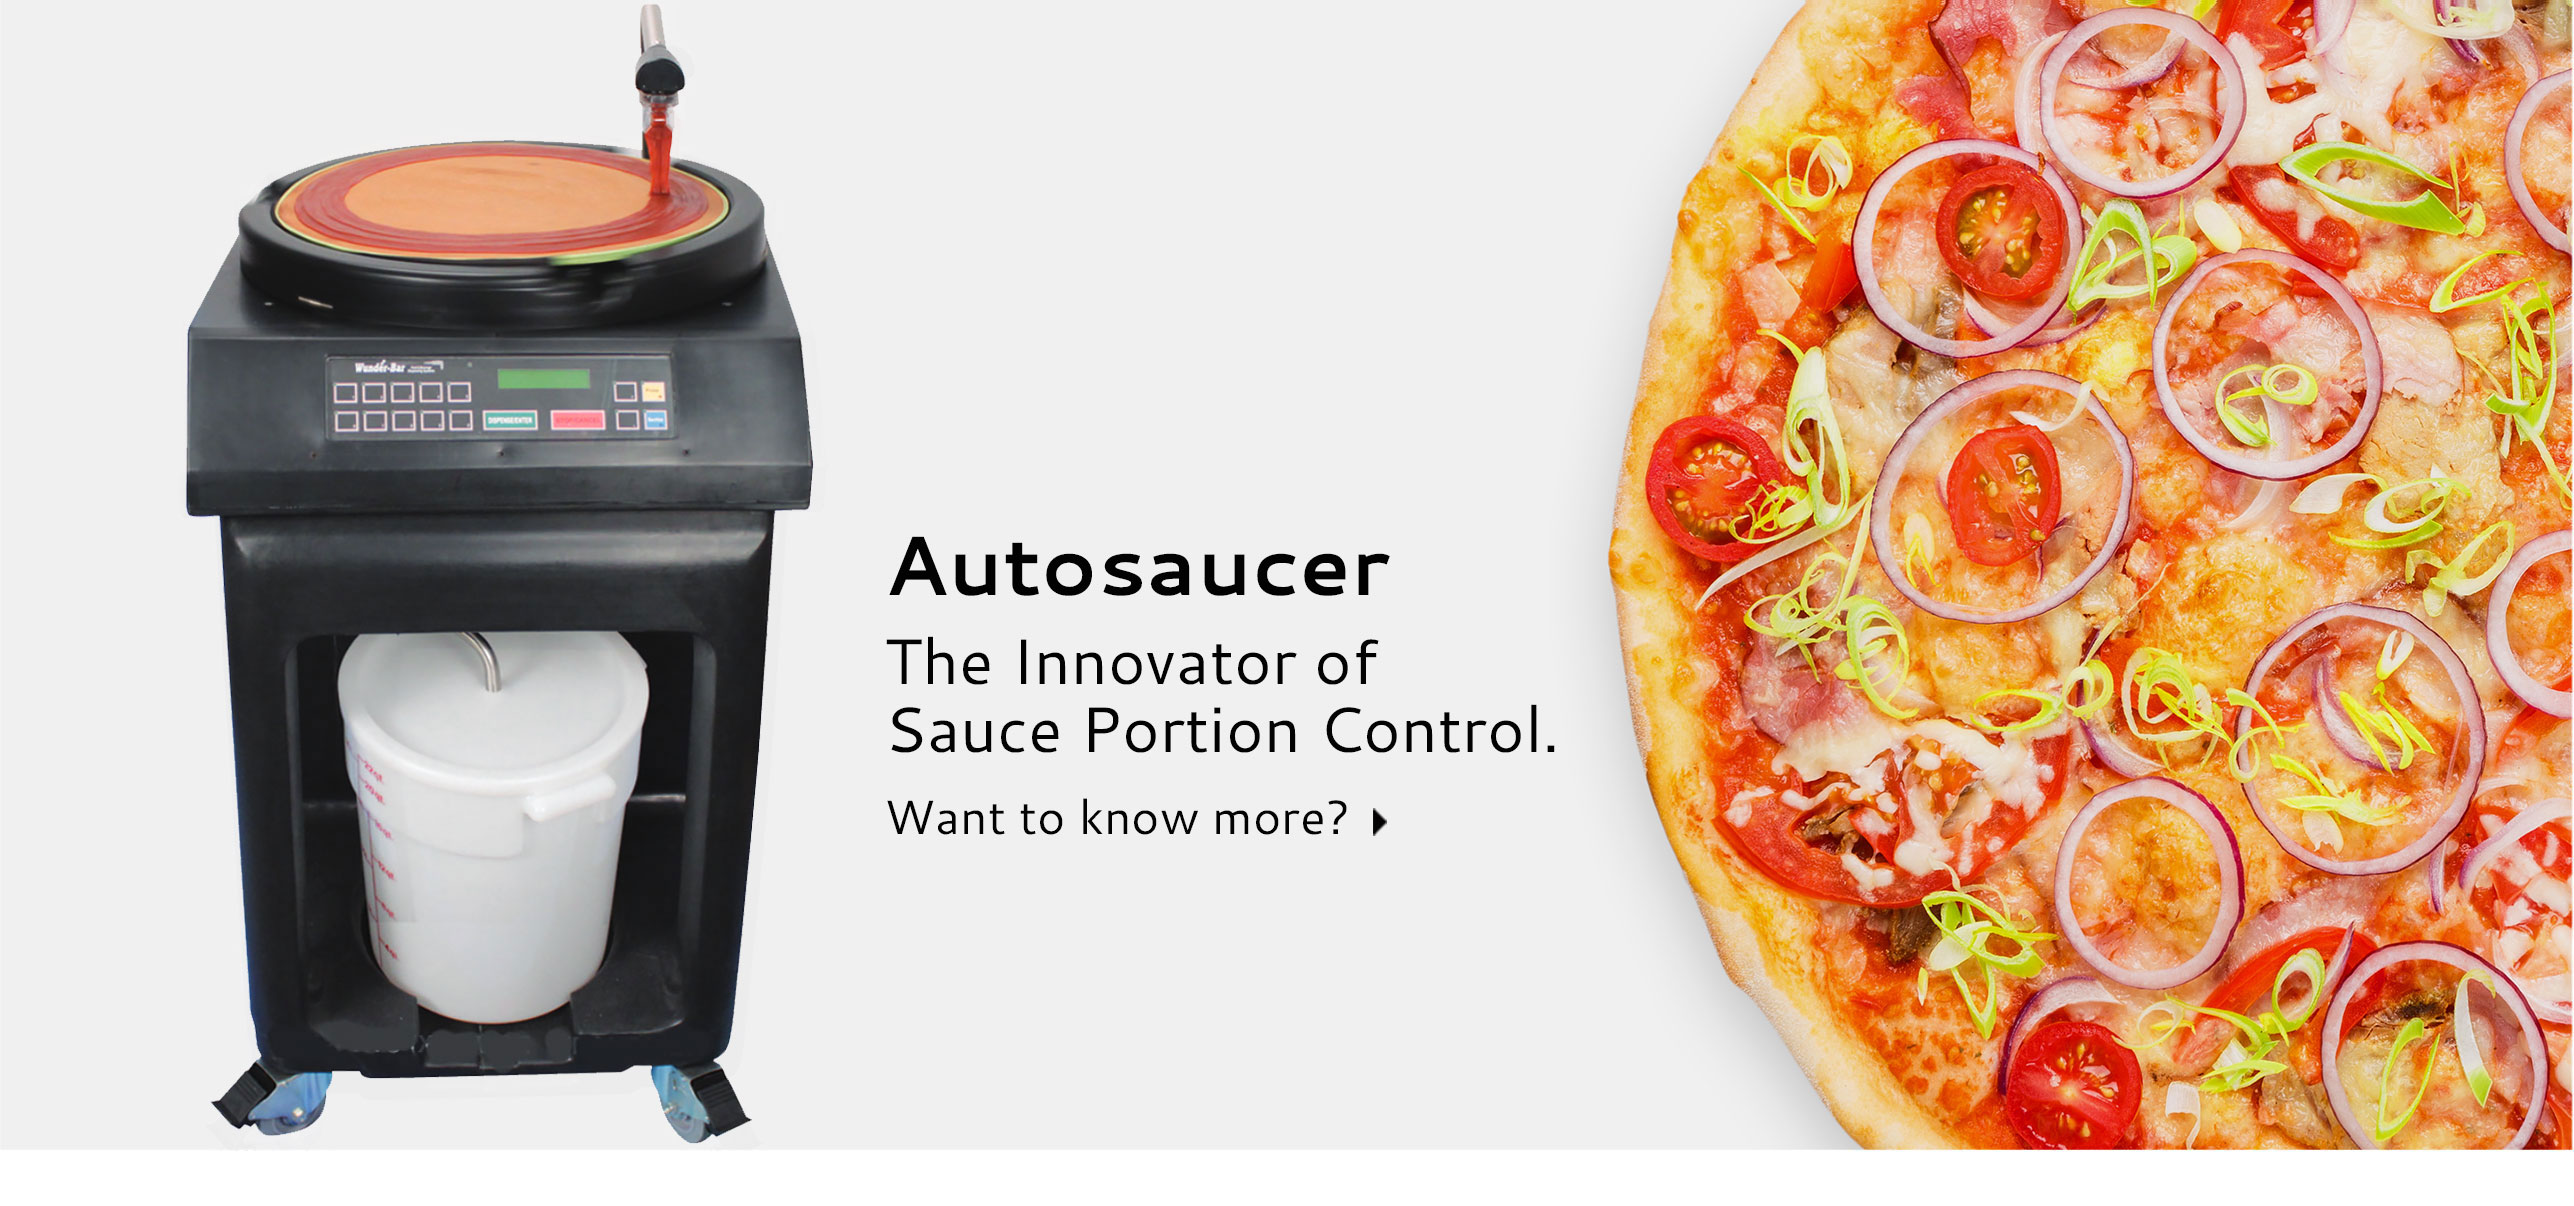 Autosaucer
The Innovator of Sauce Portion Control